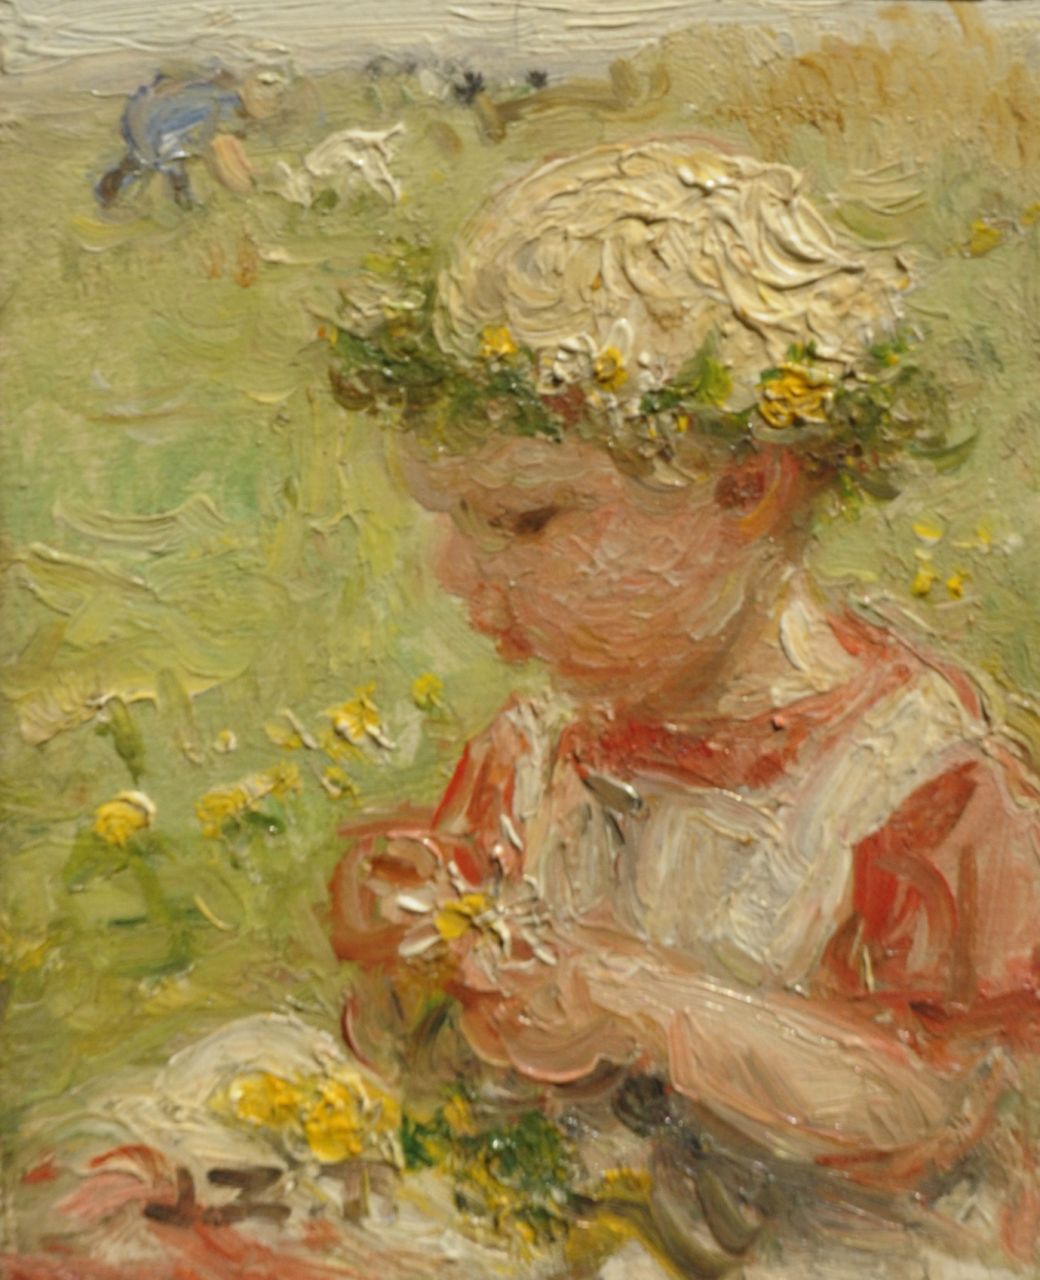 Zoetelief Tromp J.  | Johannes 'Jan' Zoetelief Tromp, Little girl picking flowers, oil on panel 9.3 x 7.3 cm, signed l.l. with initials and in full on the reverse